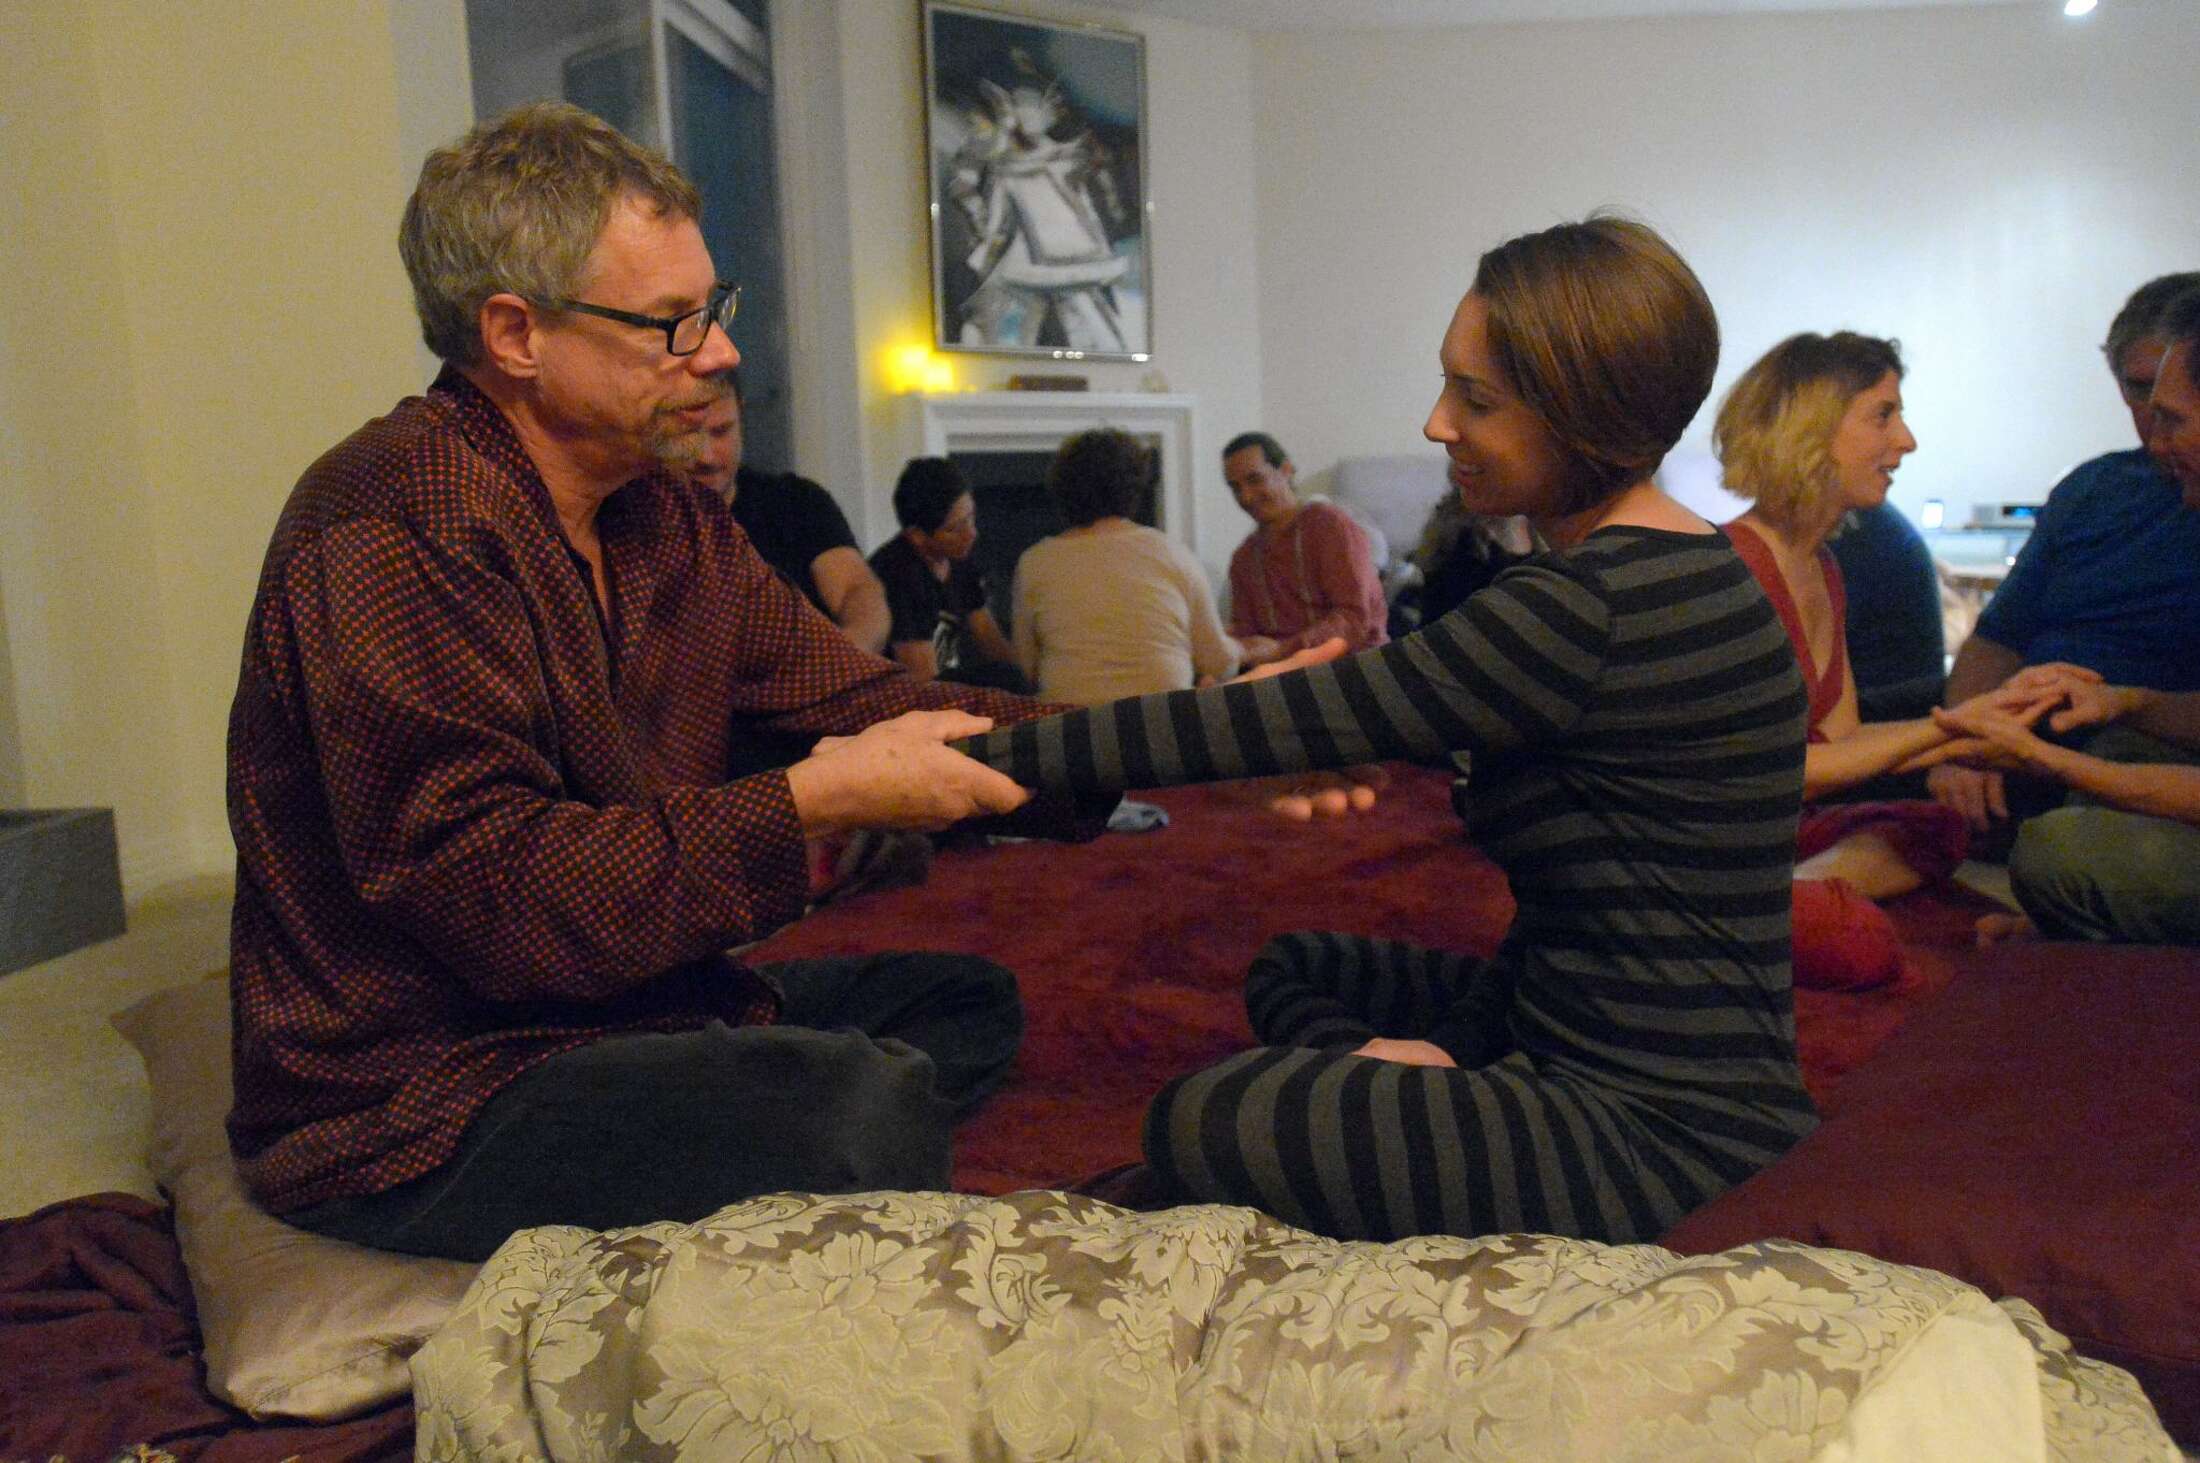 I Cuddled With Strangers At A Cuddle Party San Franciscos Latest